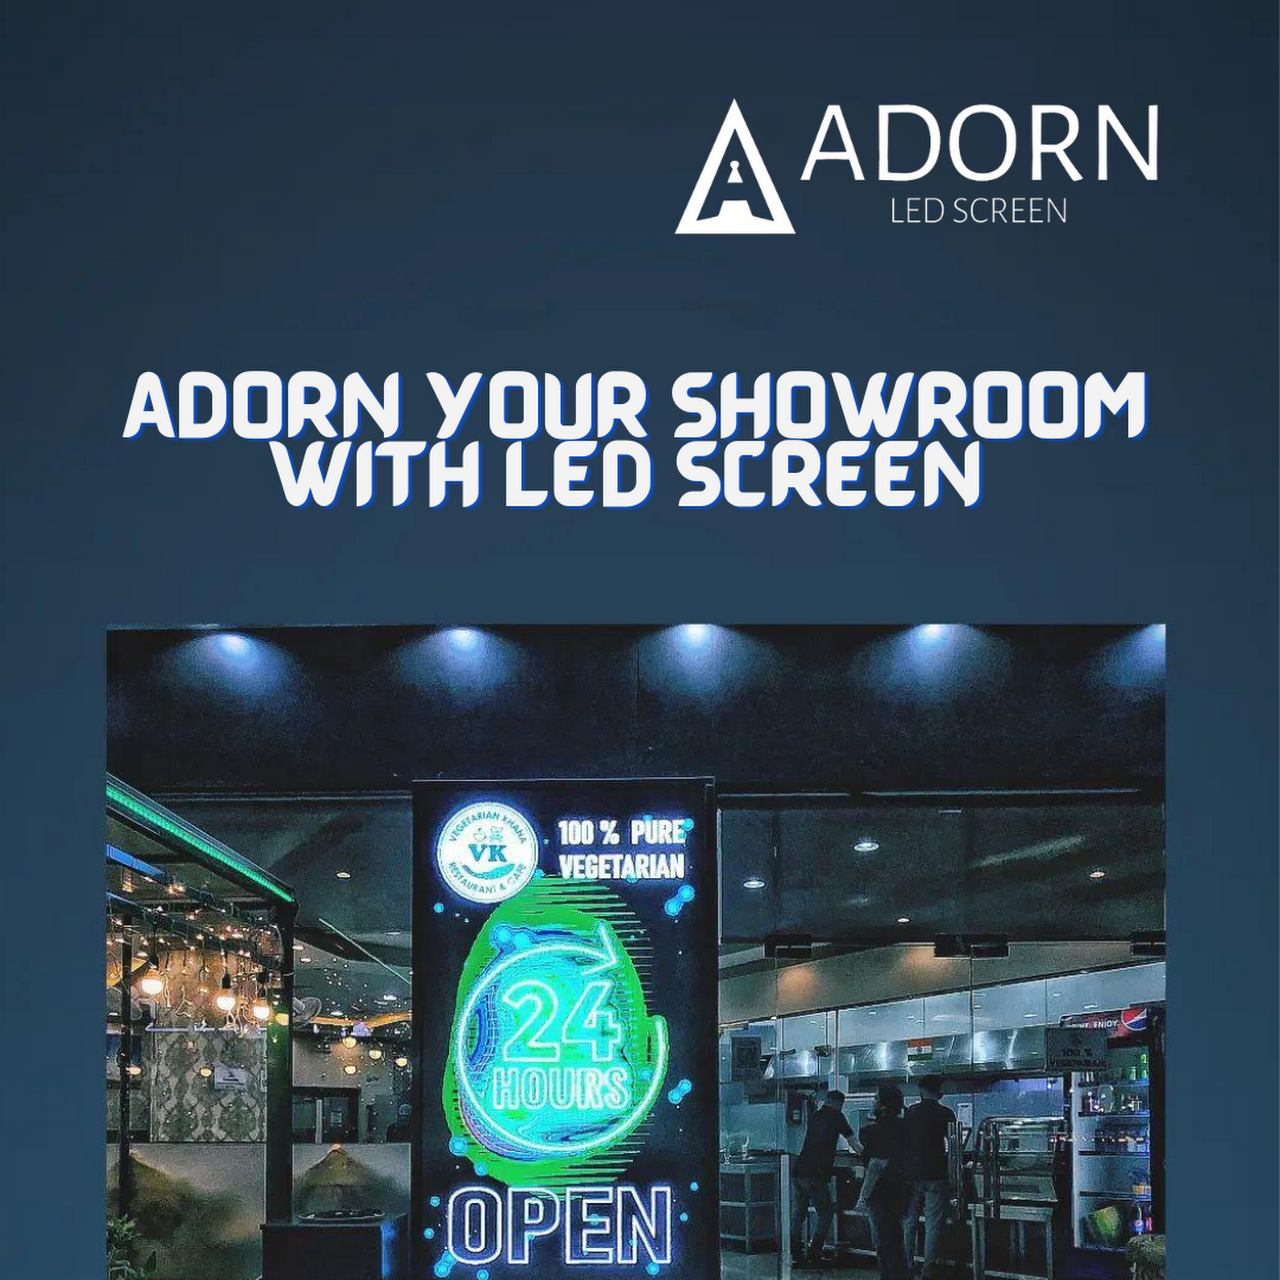 Adorn-LED-Screen-Your-Top-Choice-for-LED-Screen-Suppliers-in-UAE